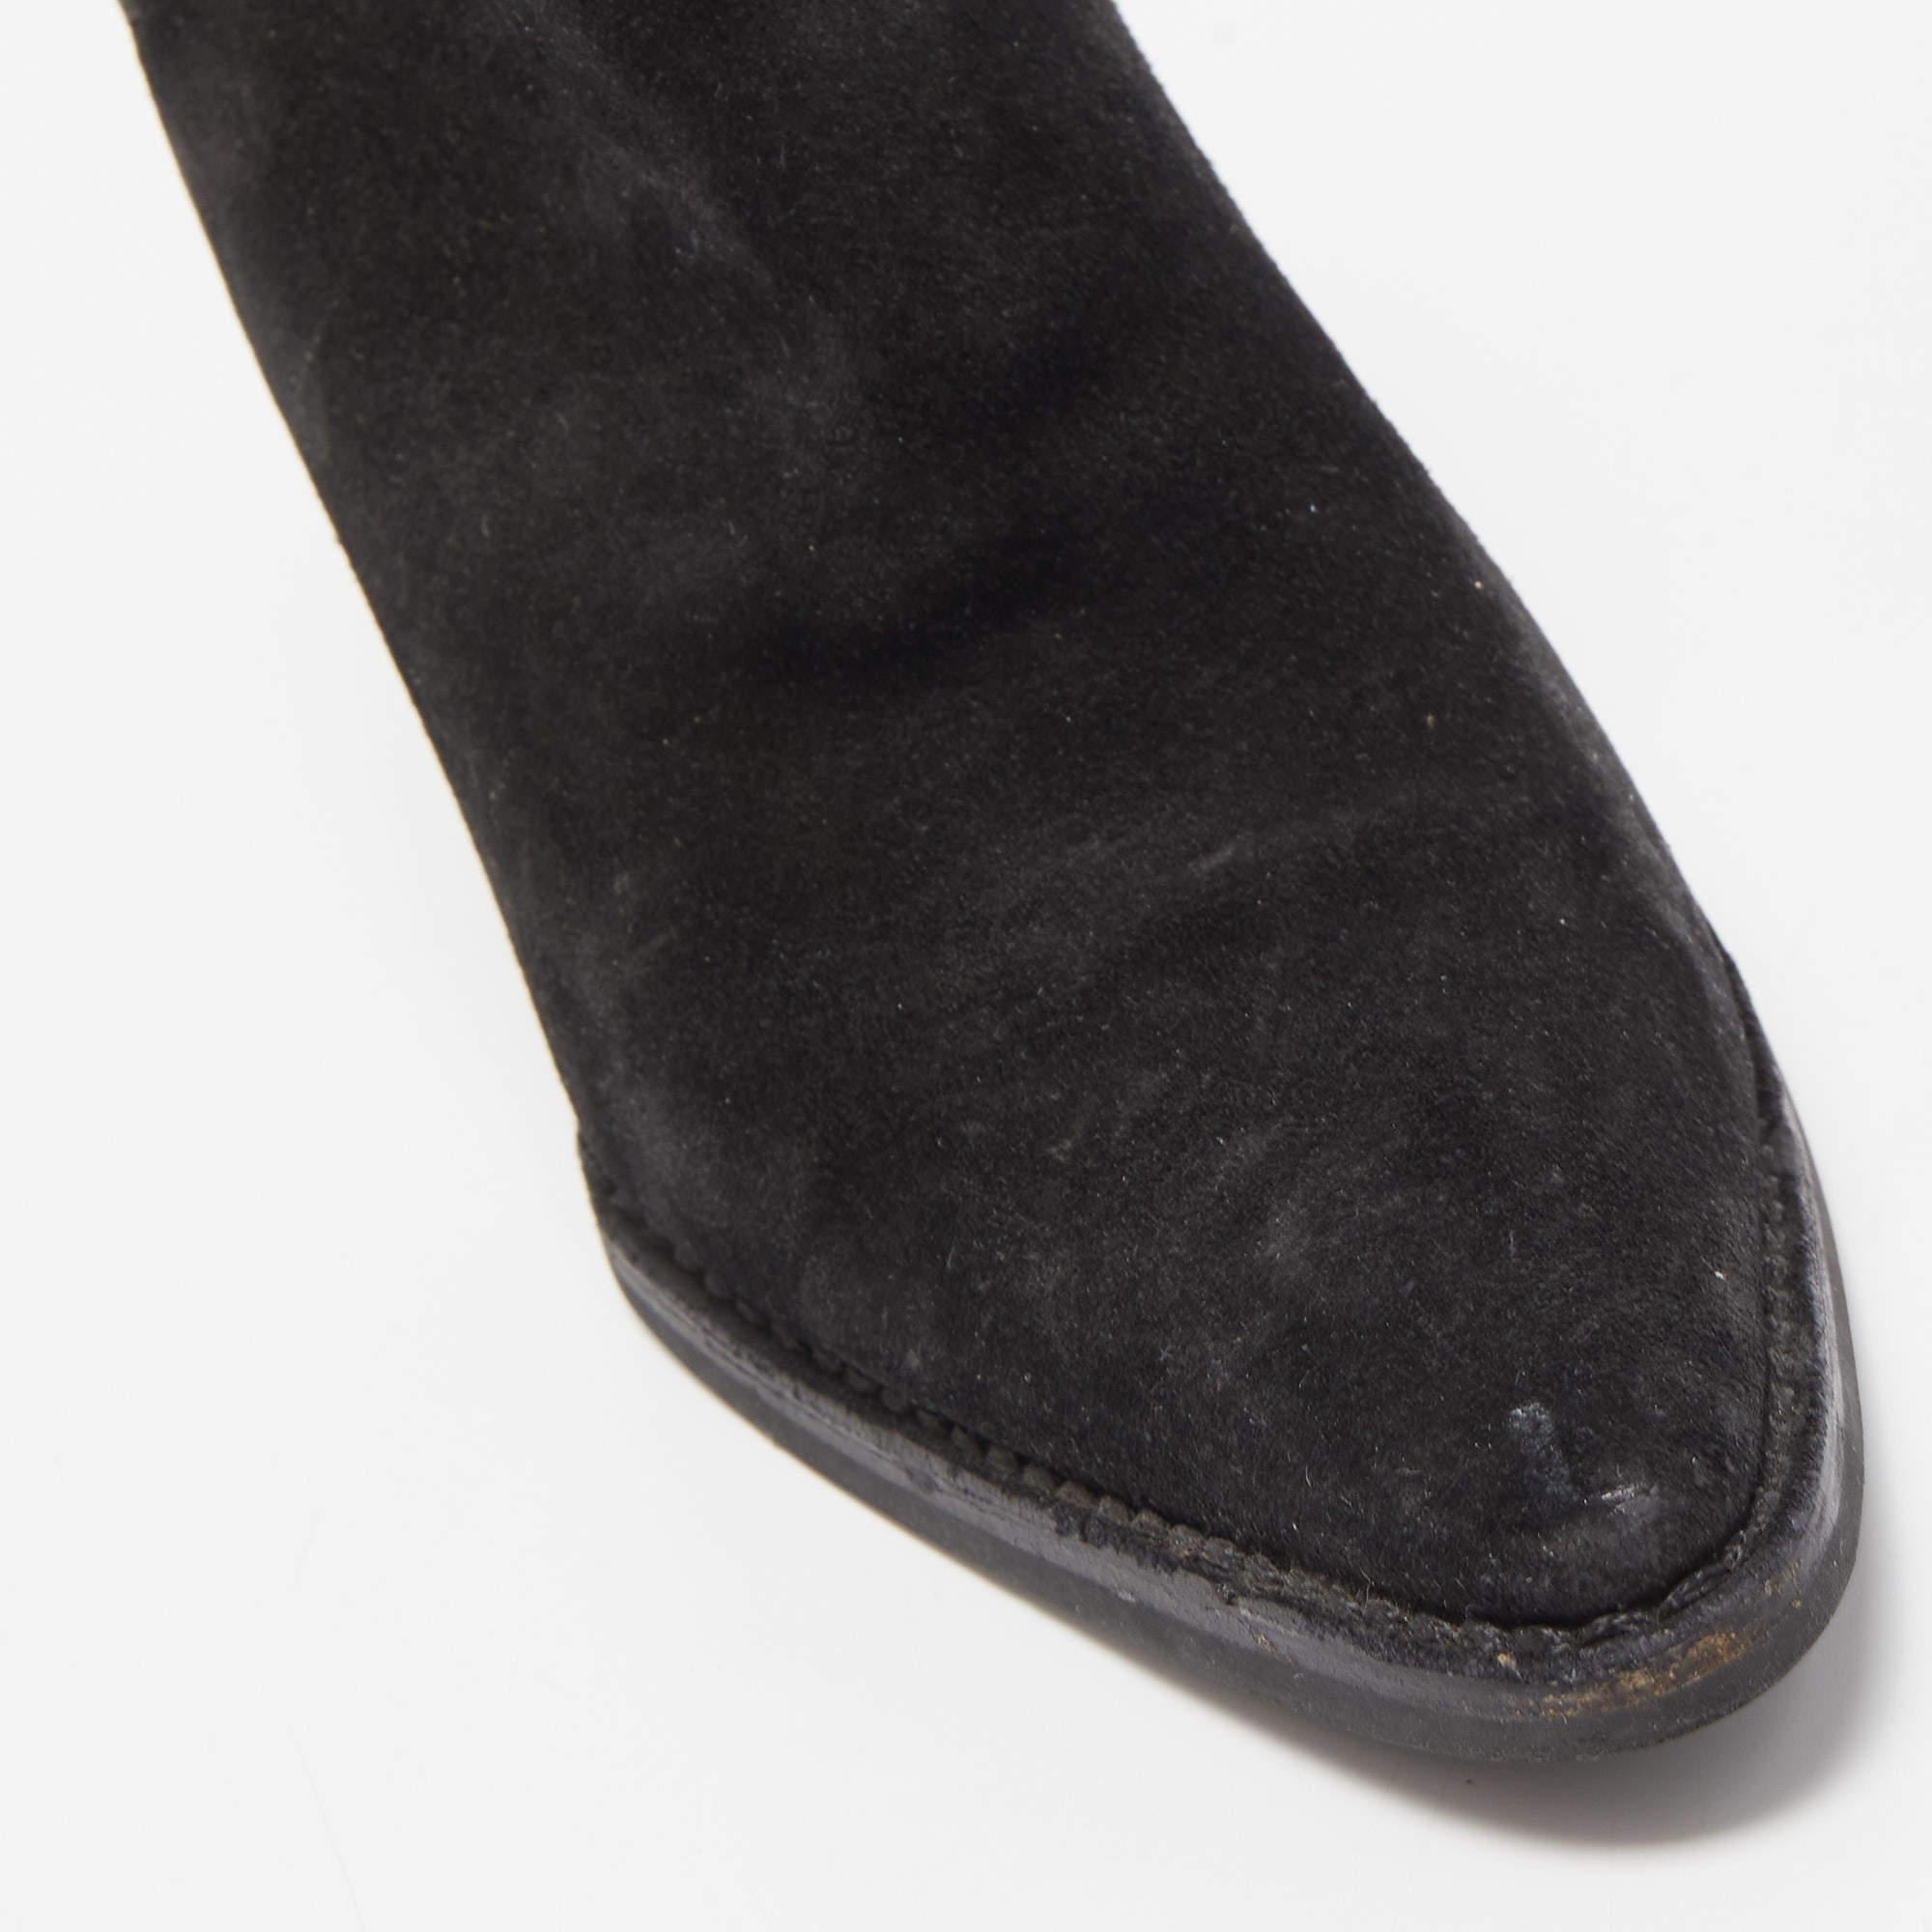 Gucci Black Suede Pointed Toe Ankle Boots Size 39 In Good Condition For Sale In Dubai, Al Qouz 2